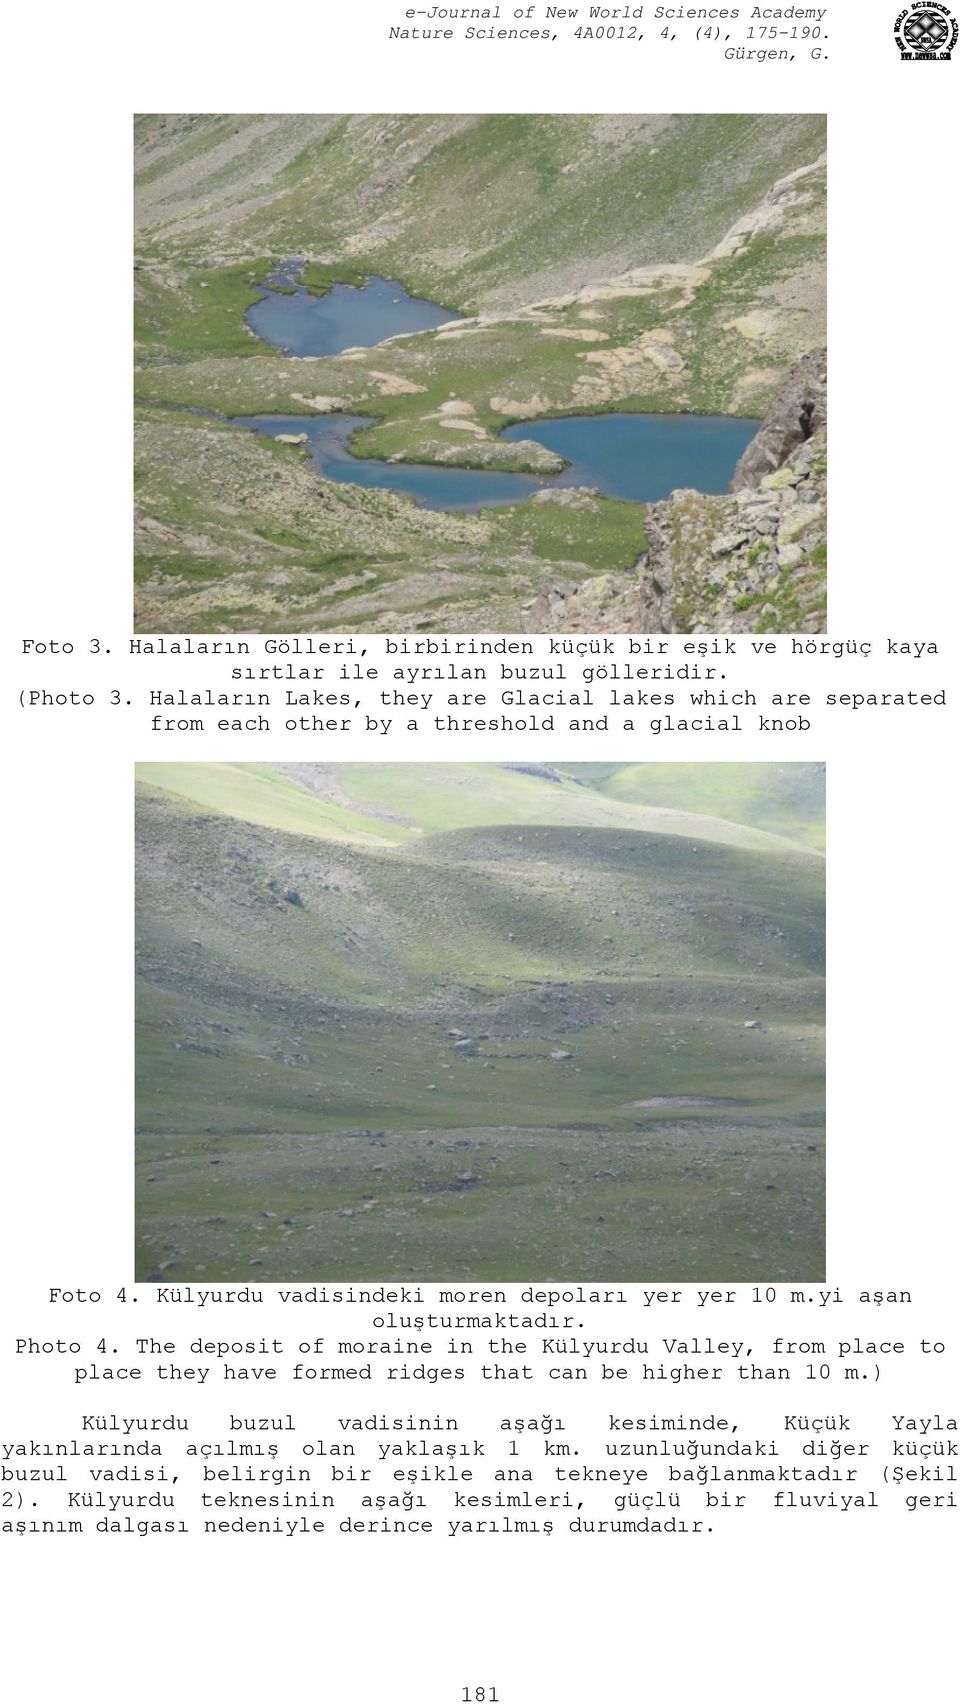 yi aşan oluşturmaktadır. Photo 4. The deposit of moraine in the Külyurdu Valley, from place to place they have formed ridges that can be higher than 10 m.